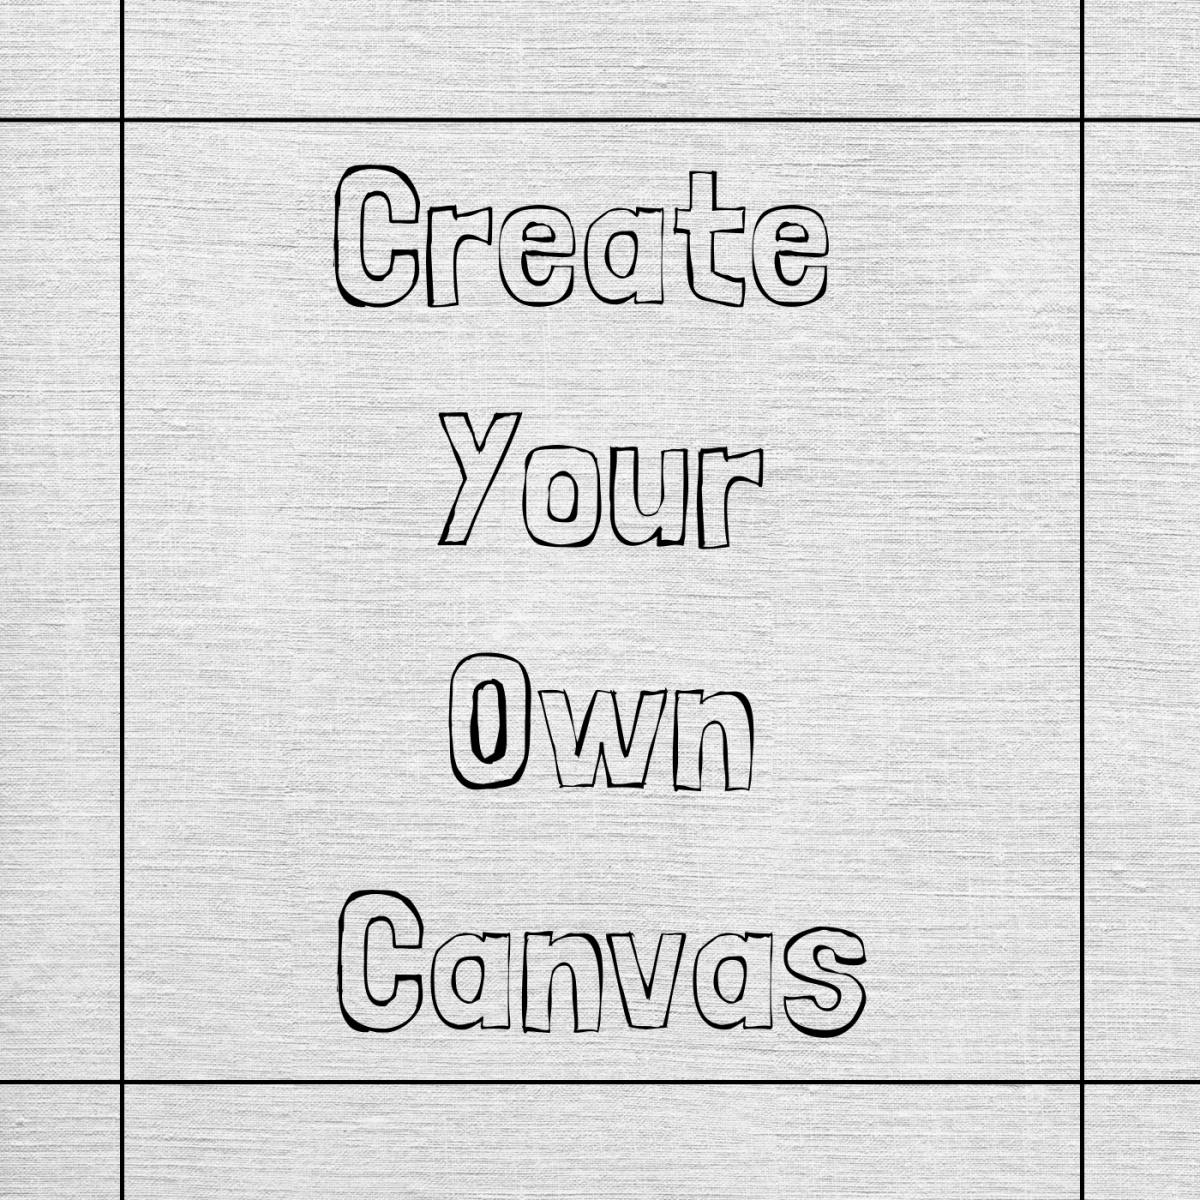 Learn how to make your own canvas.